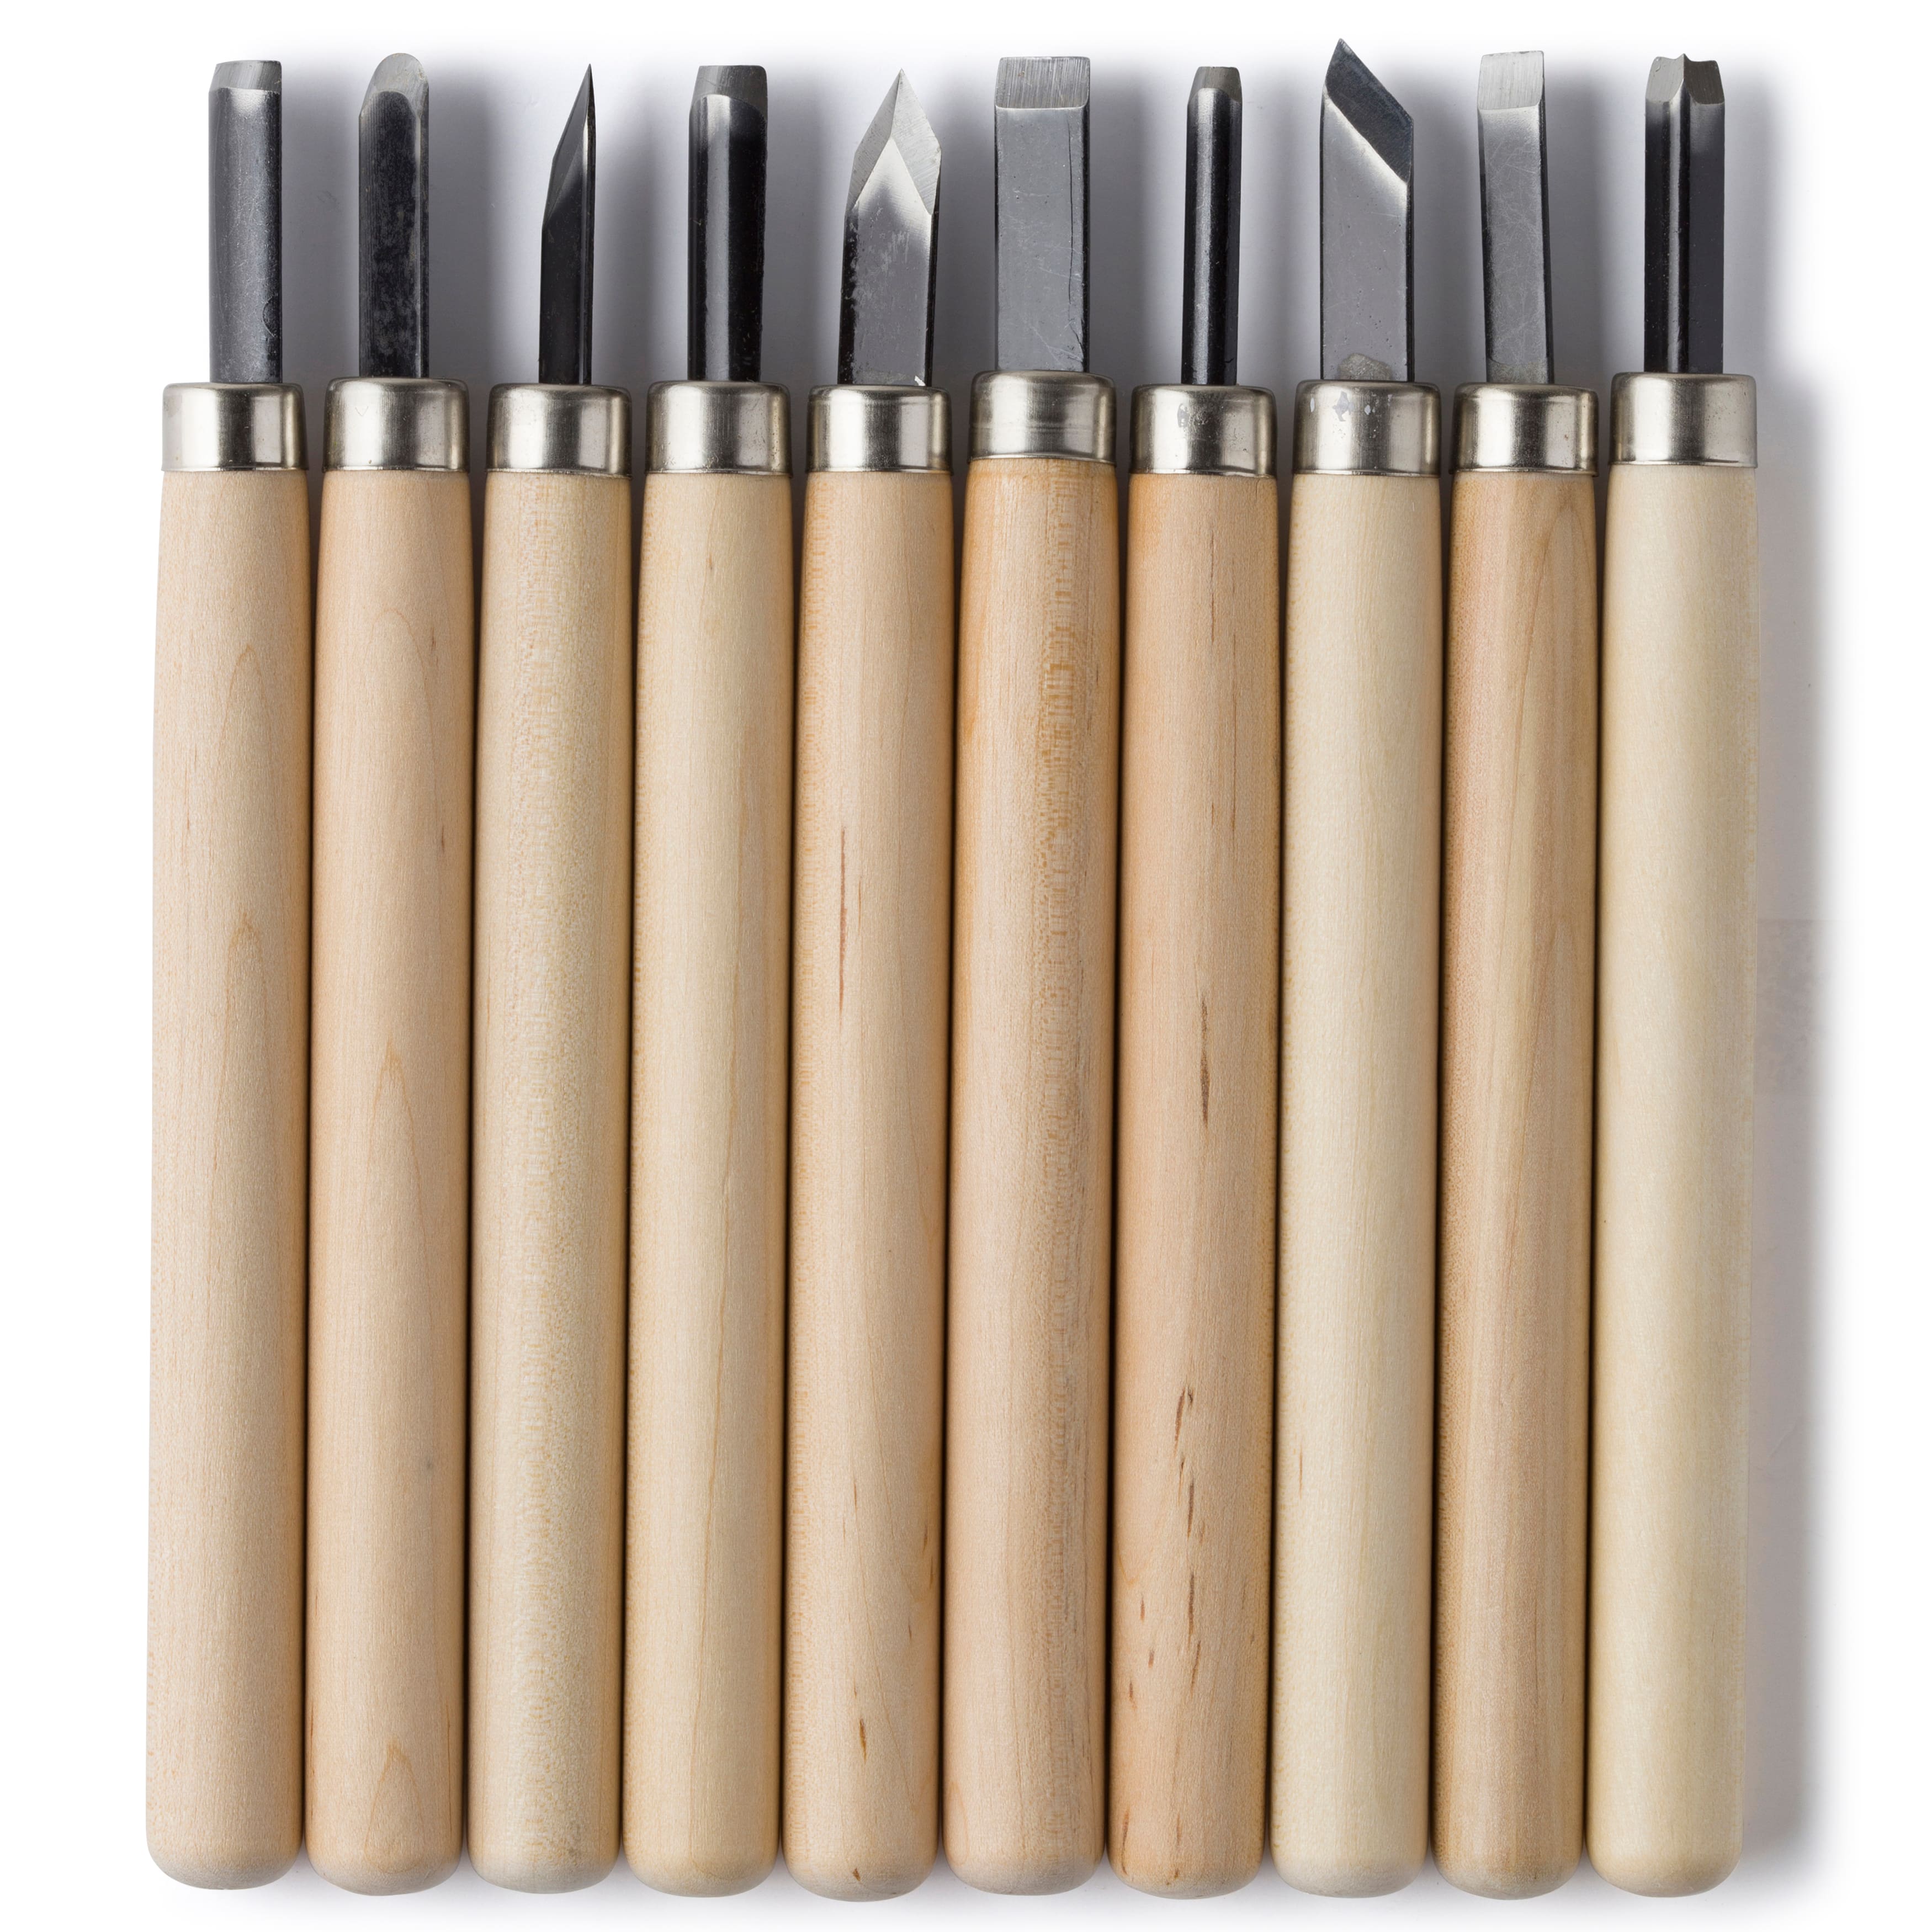 6 Packs: 10 ct. (60 total) Wood Carving Knife Set by ArtMinds&#x2122;